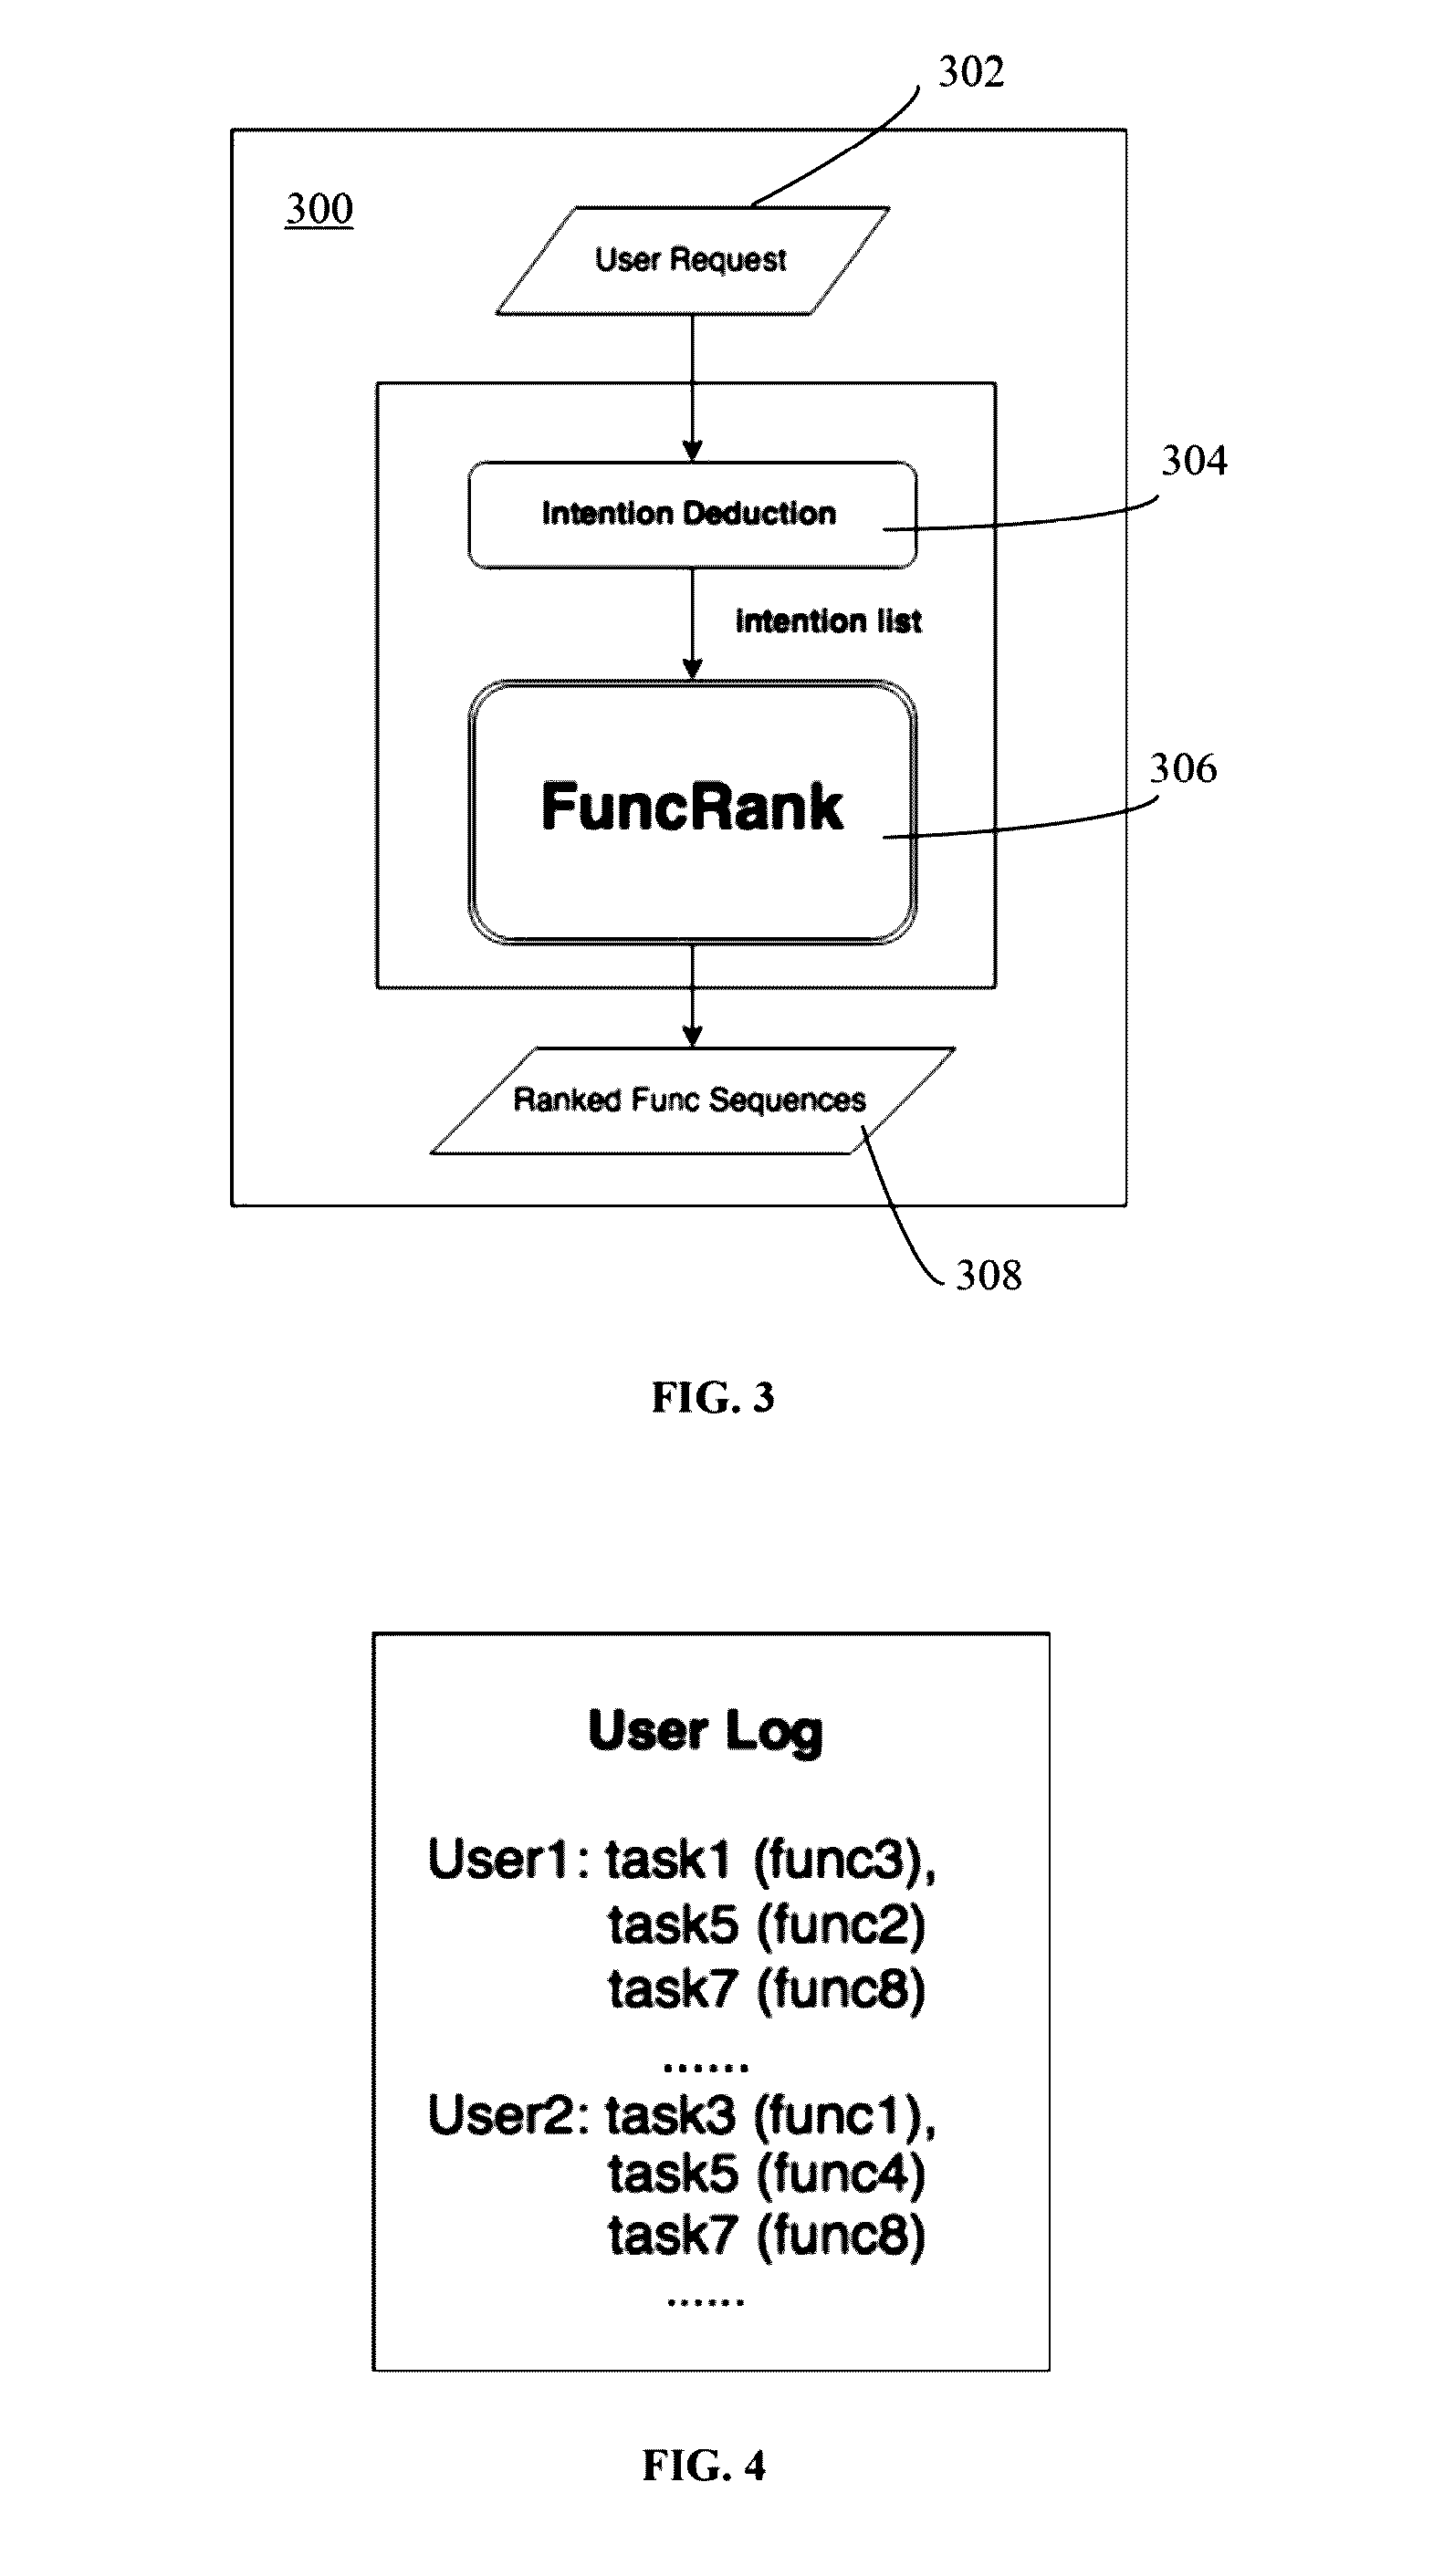 Function-based action sequence derivation for personal assistant system